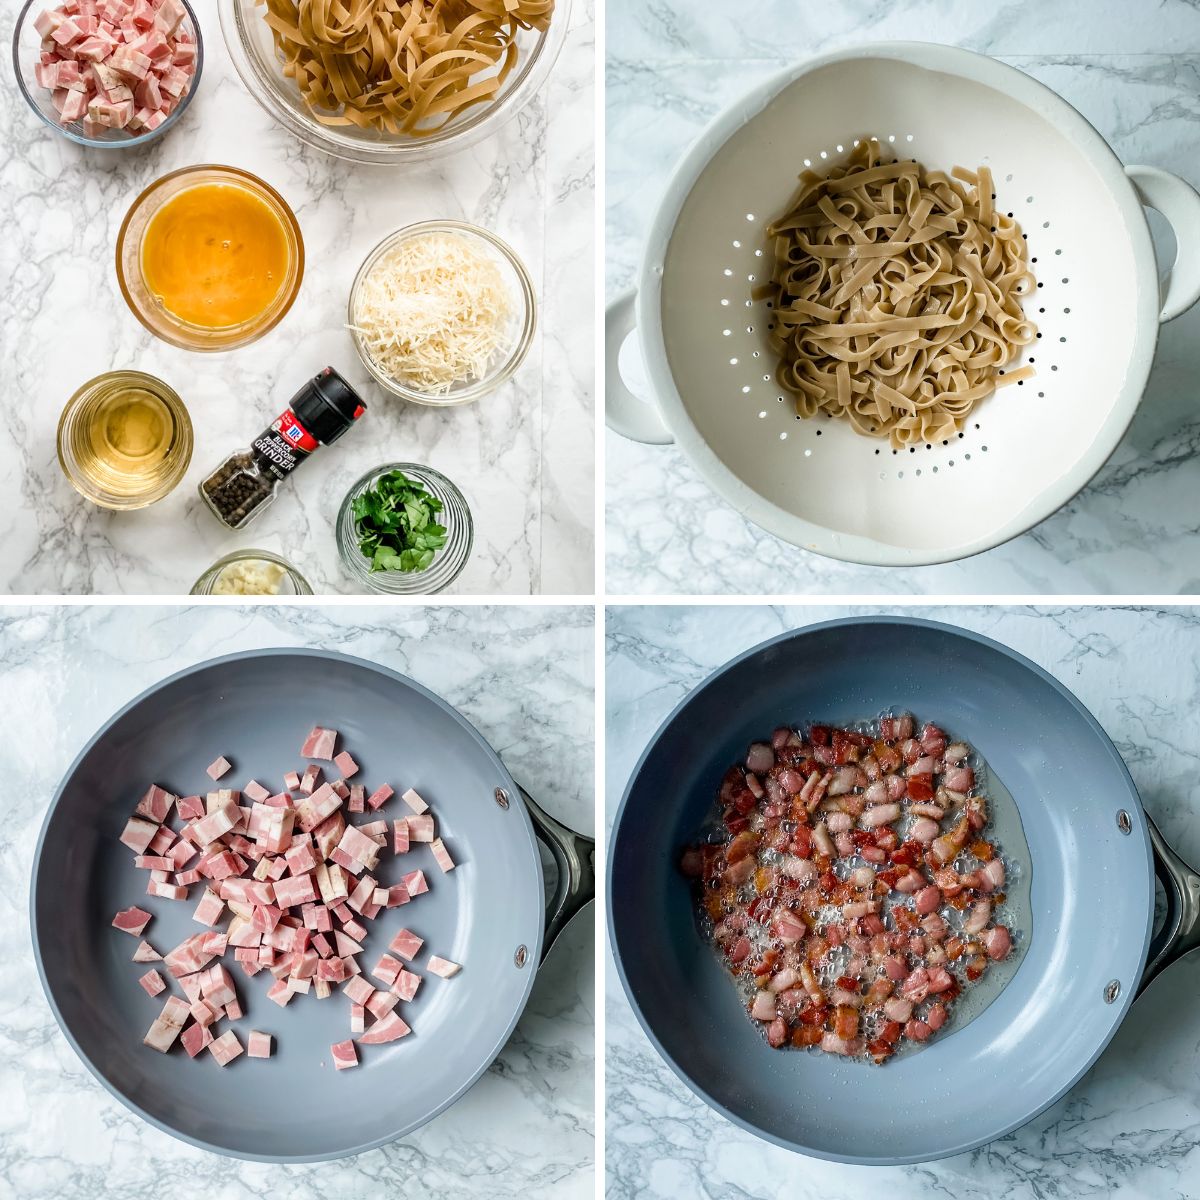 step by step collage showing how to make Carbonara sauce.